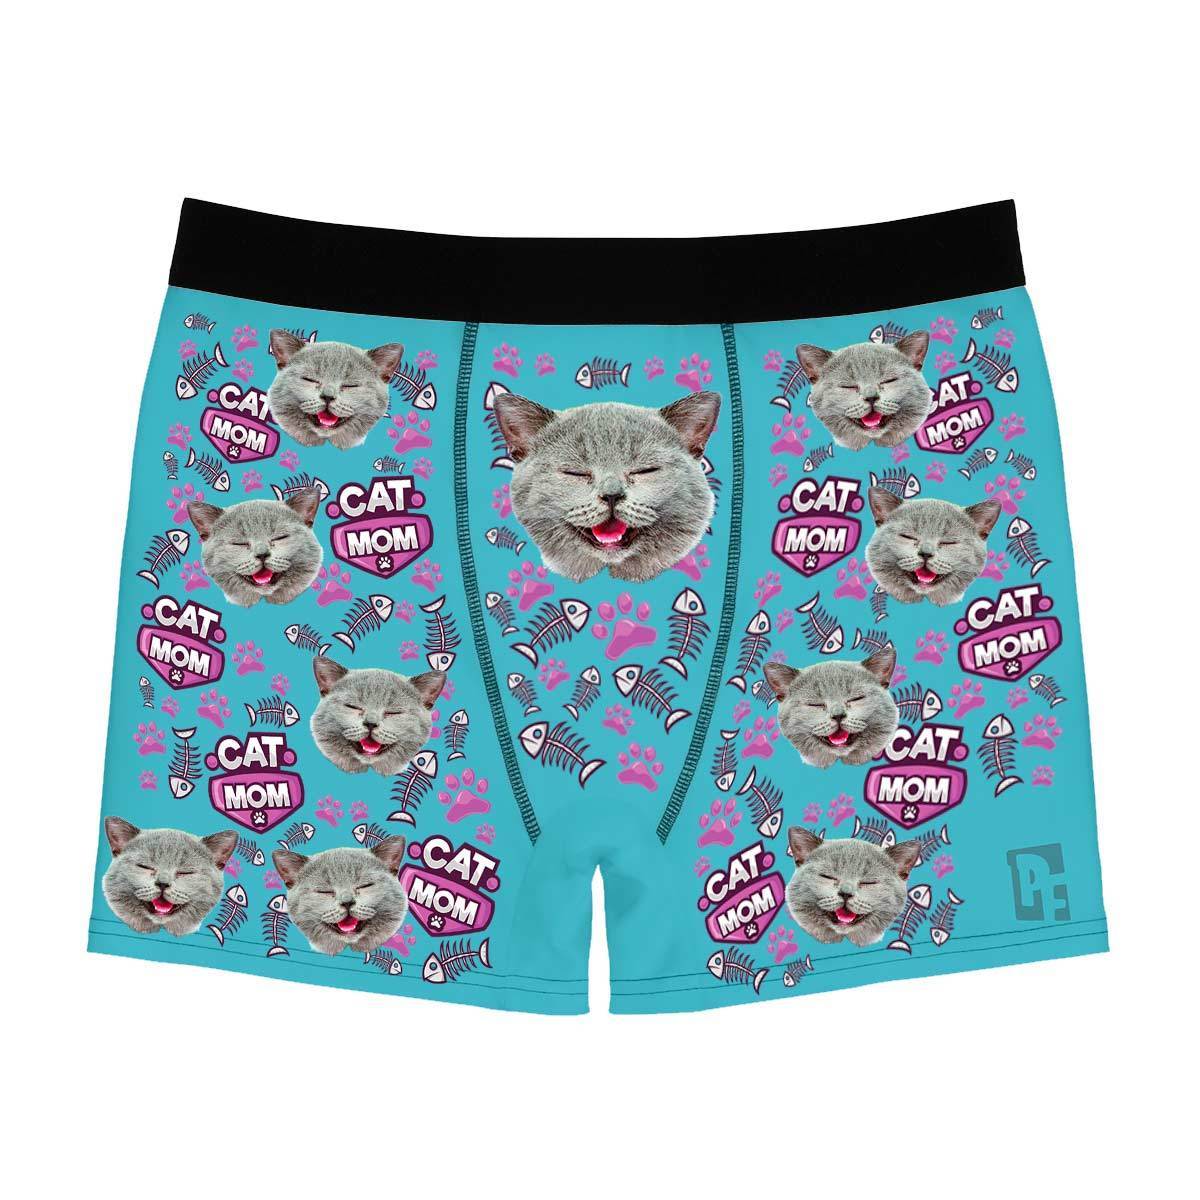 Blue Cat Mom men's boxer briefs personalized with photo printed on them